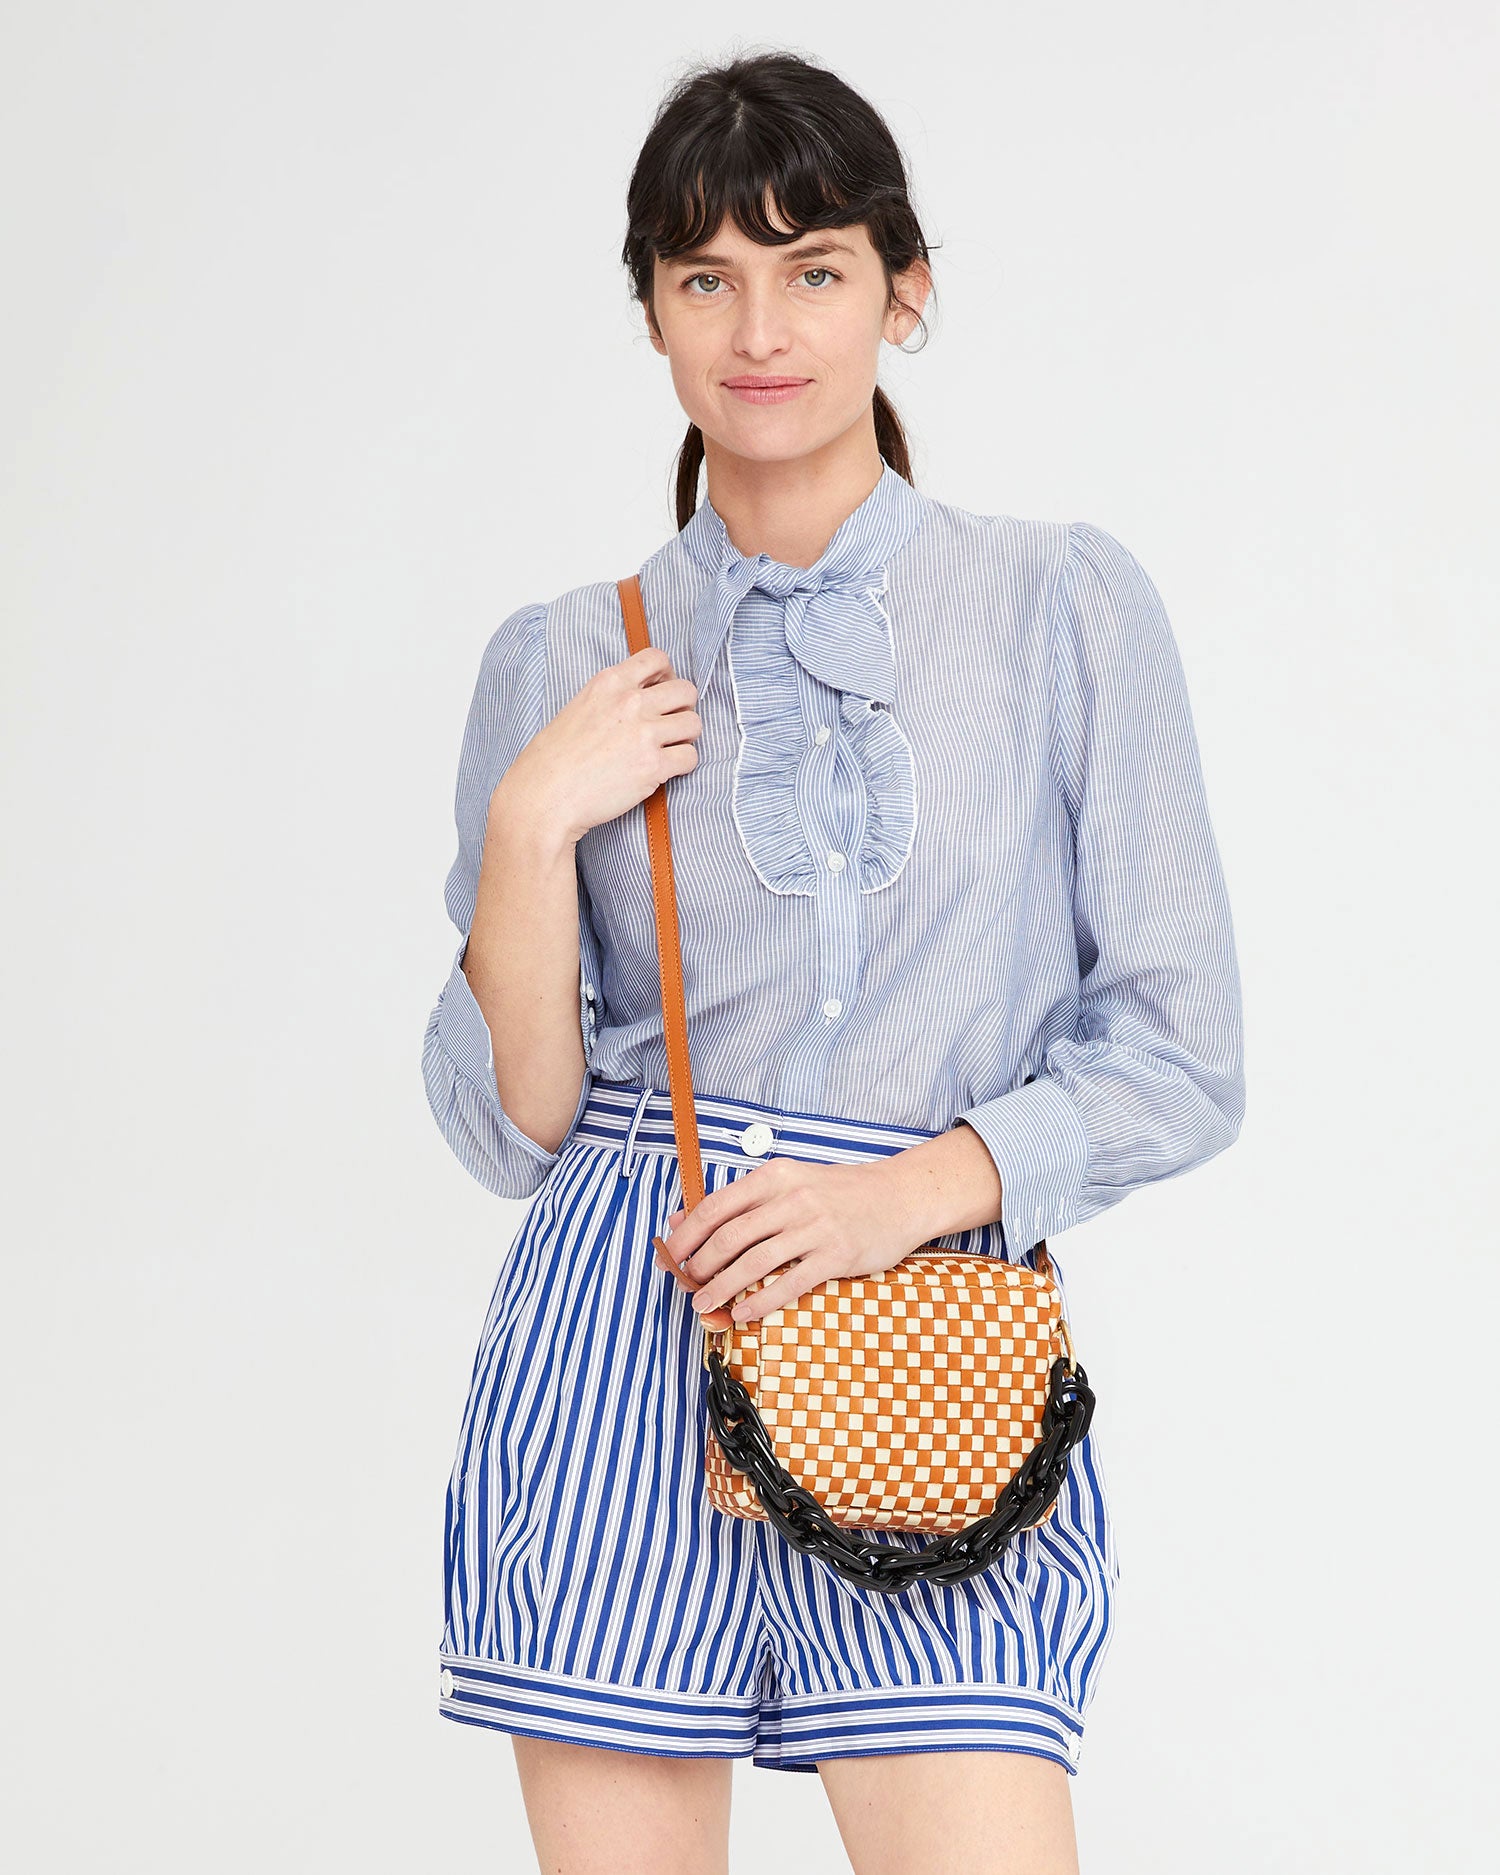 Danica wearing the Natural & Cream Woven Checker Midi Sac crossbody with the black resin shortie strap hanging off of it 